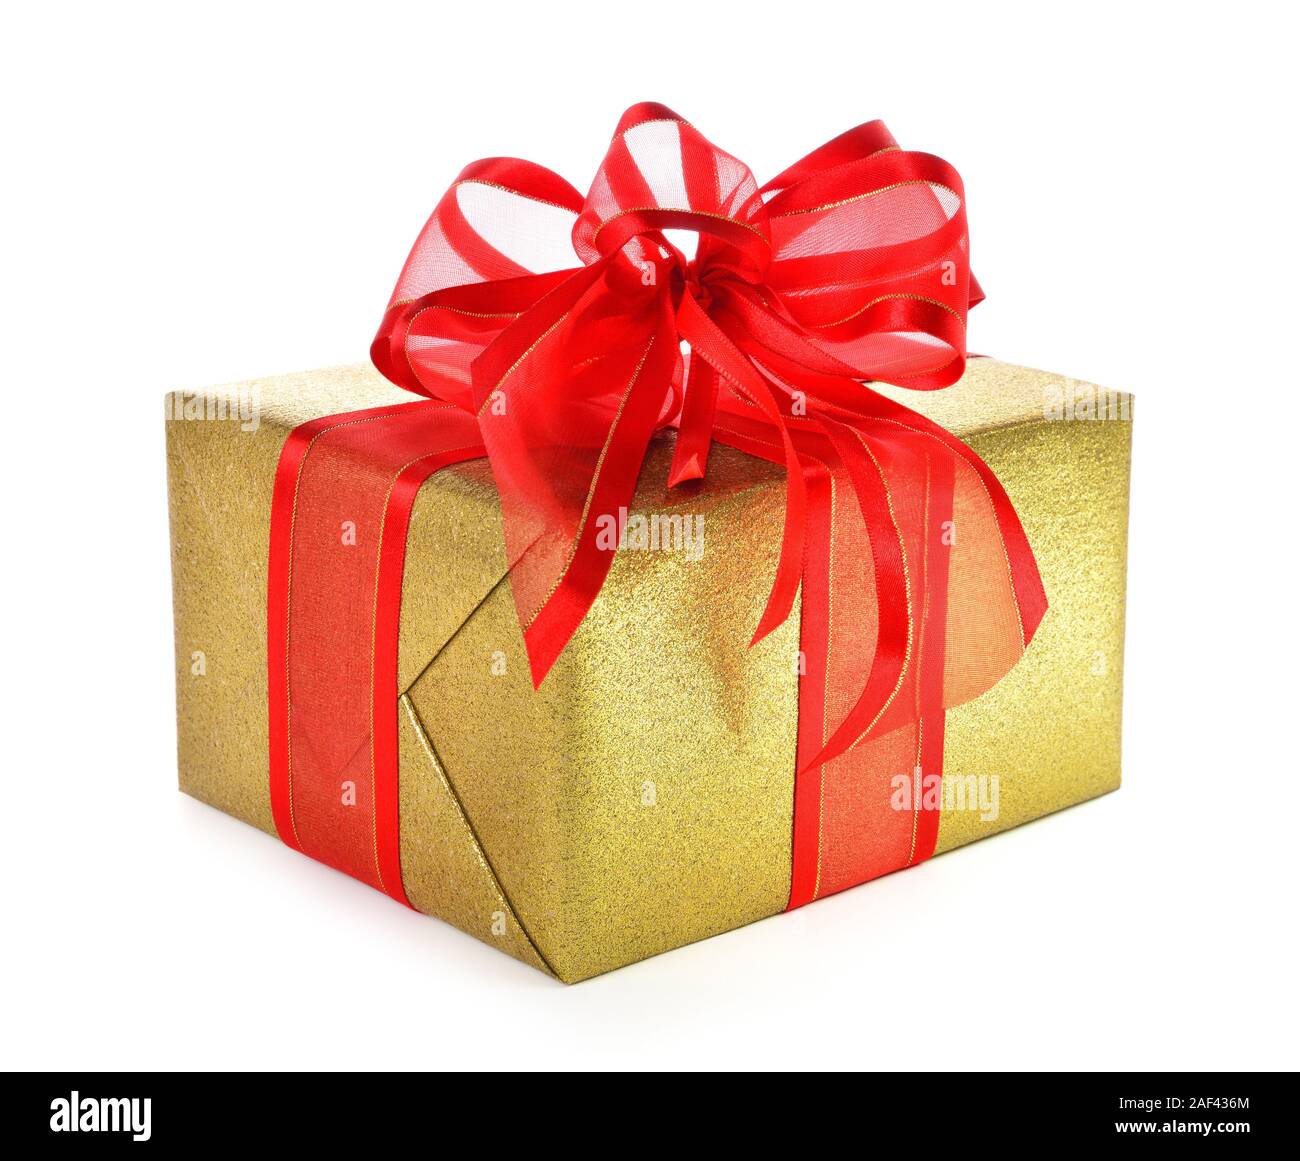 Gold gift box with red ribbon and a nice fancy bow, studio isolated on white background Stock Photo